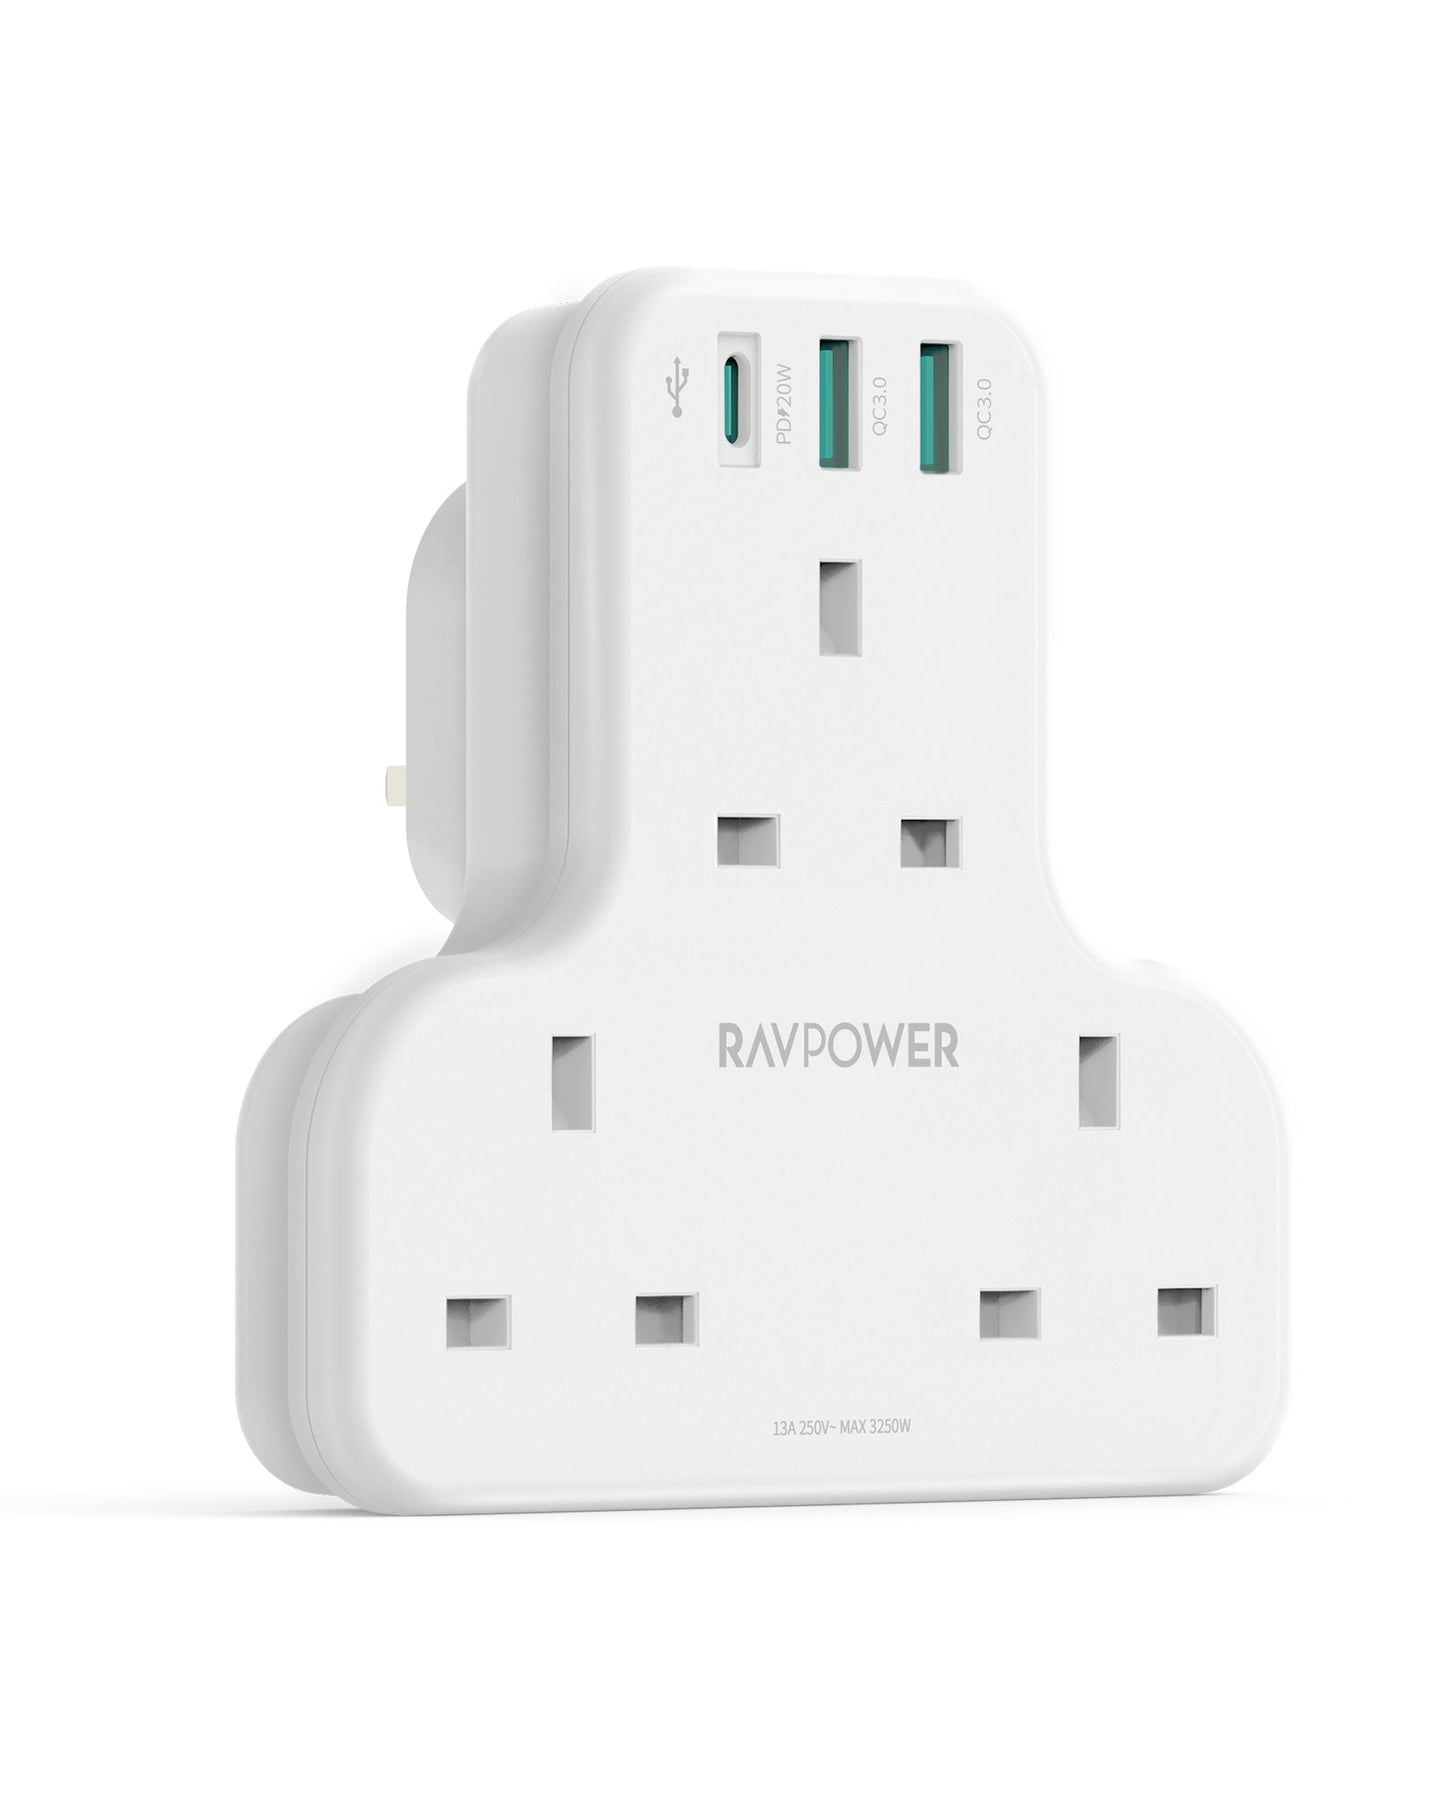 RAVPower Pioneer 20W 3 port charger with 3 AC plug - White